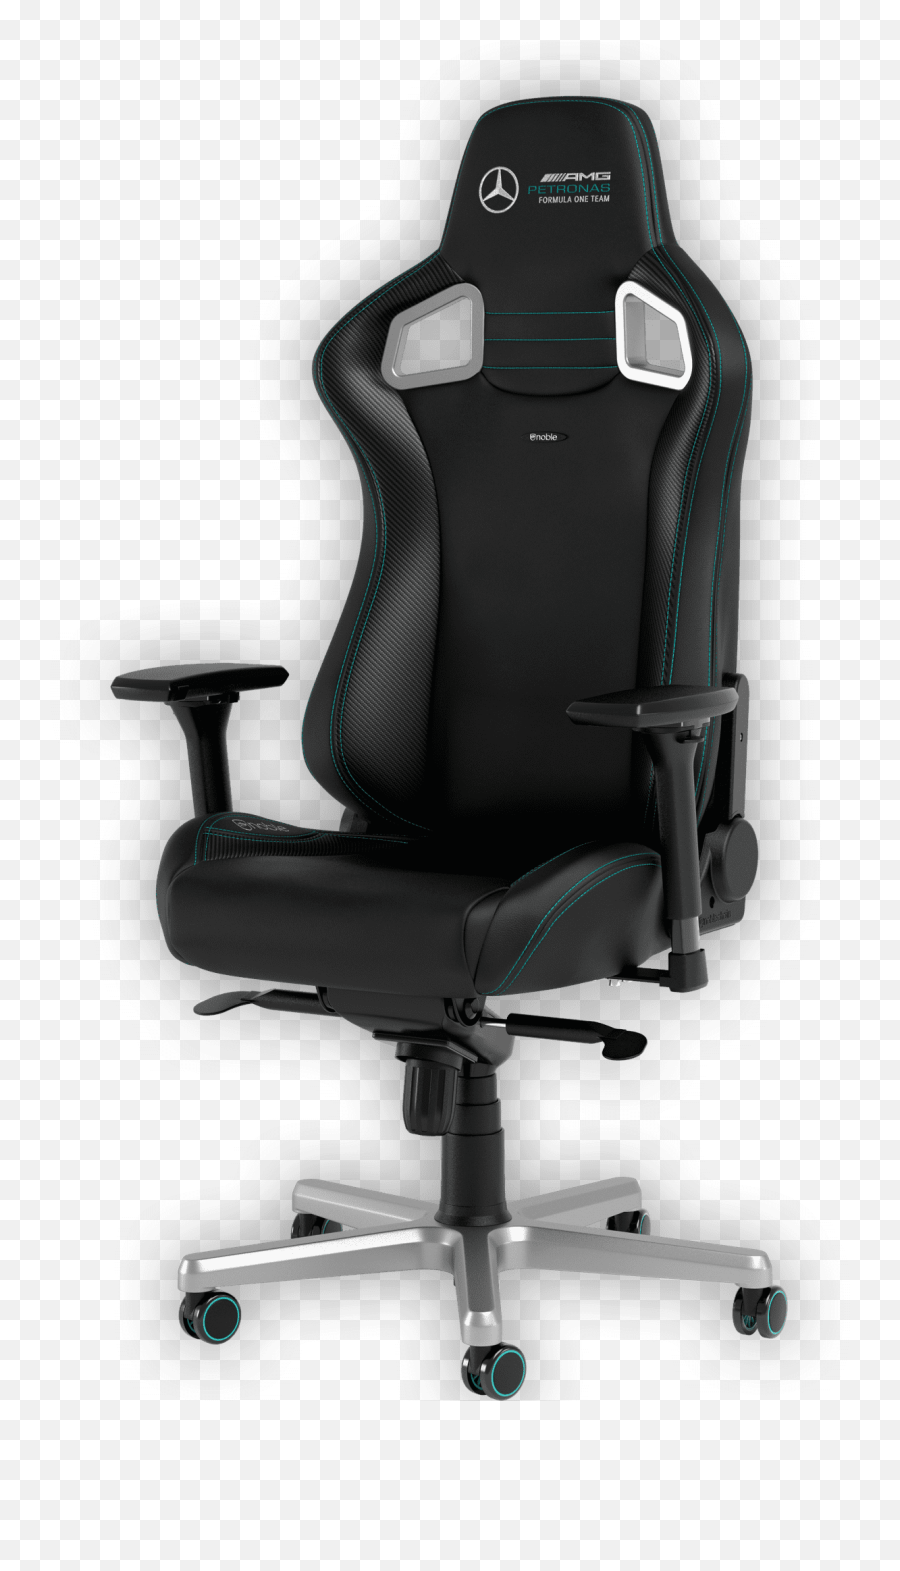 Noblechairs - The Gaming Chair Evolution Noble Chair Emoji,Chair Png